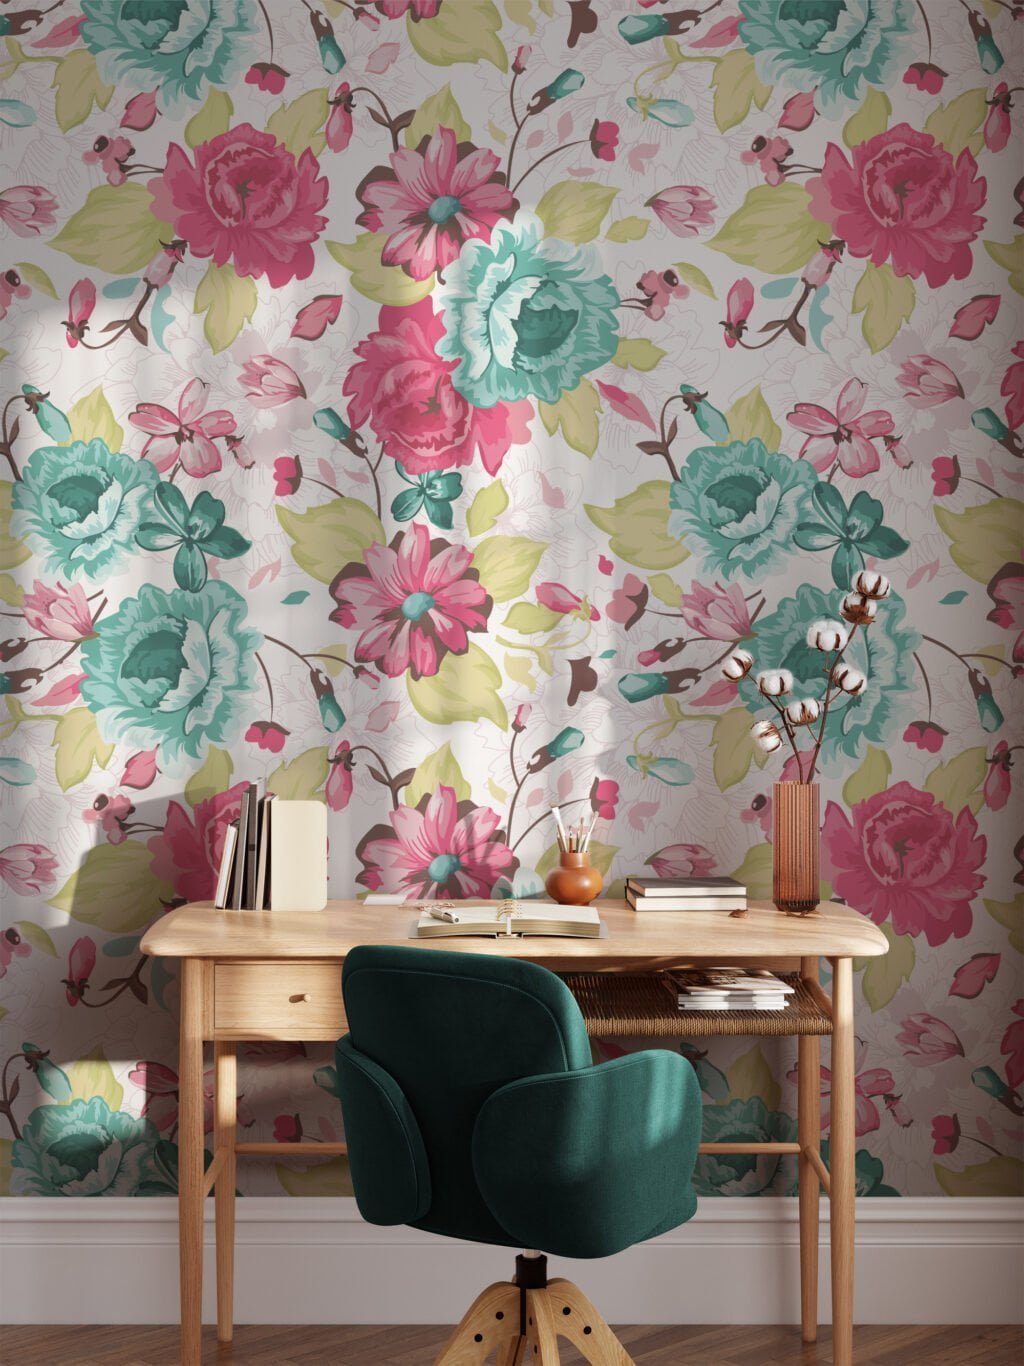 Abstract Turquoise And Pink Floral Wallpaper, Vintage Floral Charm Peel & Stick Wall Mural